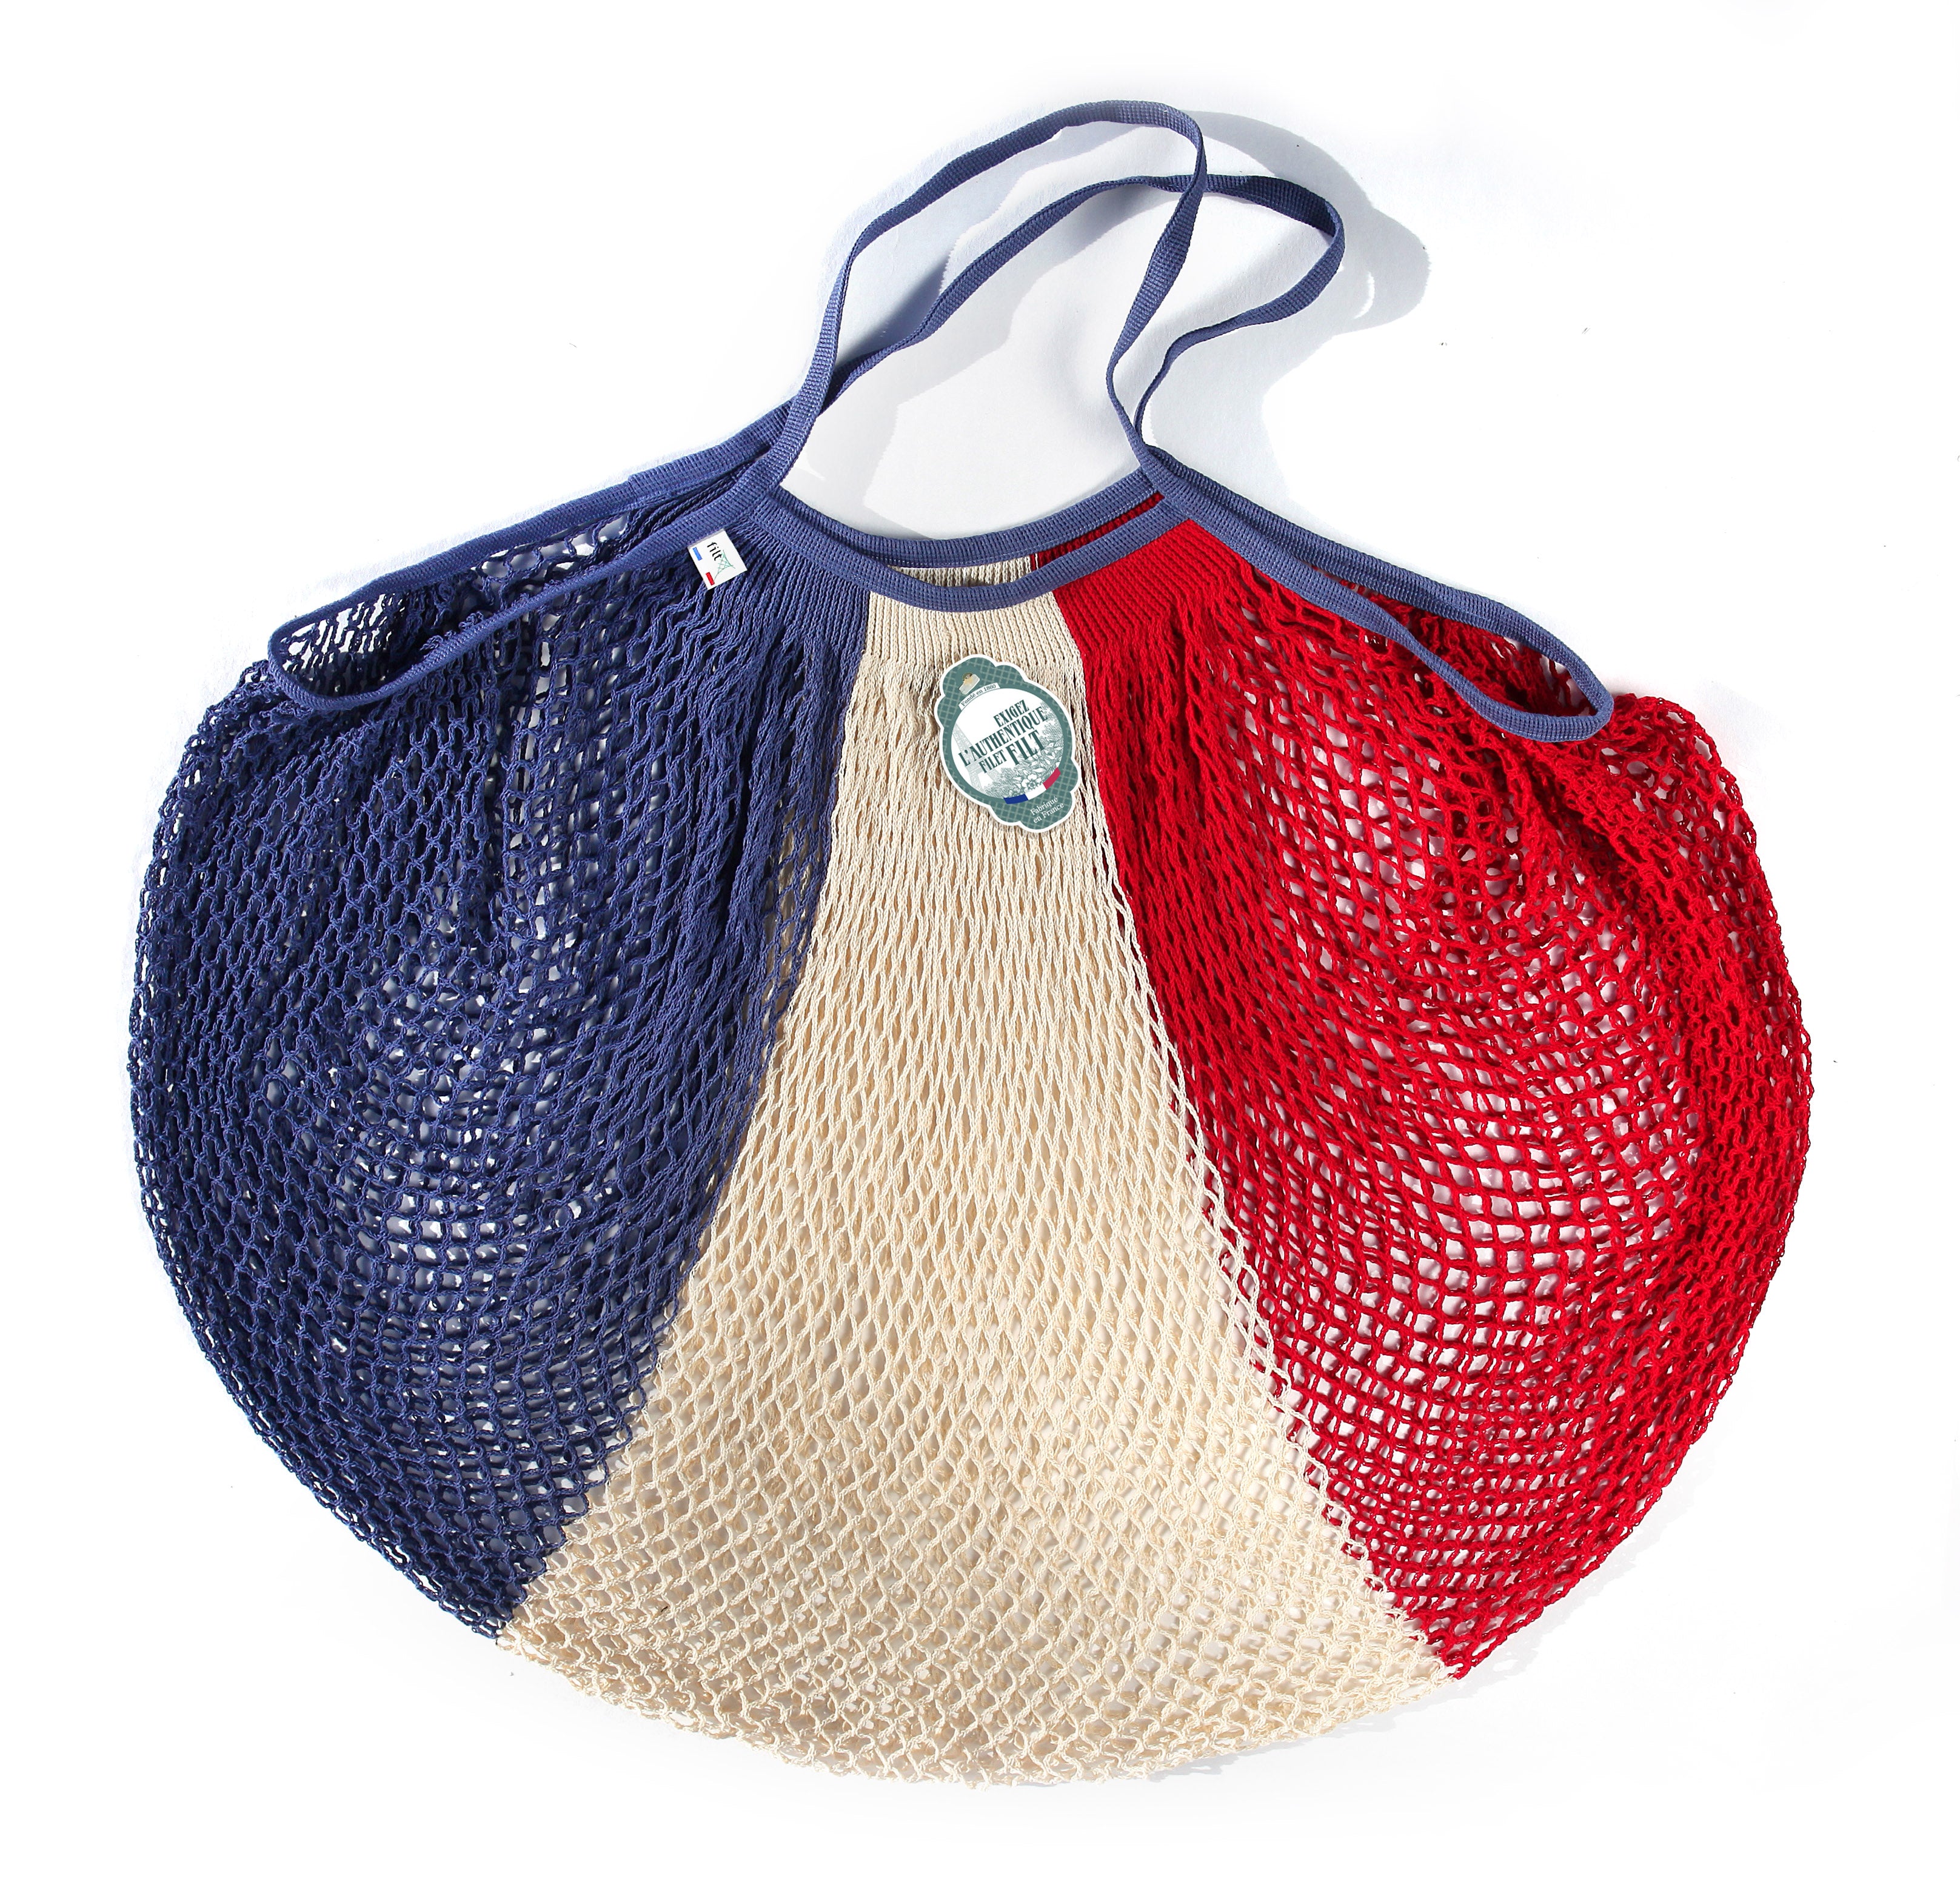 Red White Blue Tote 